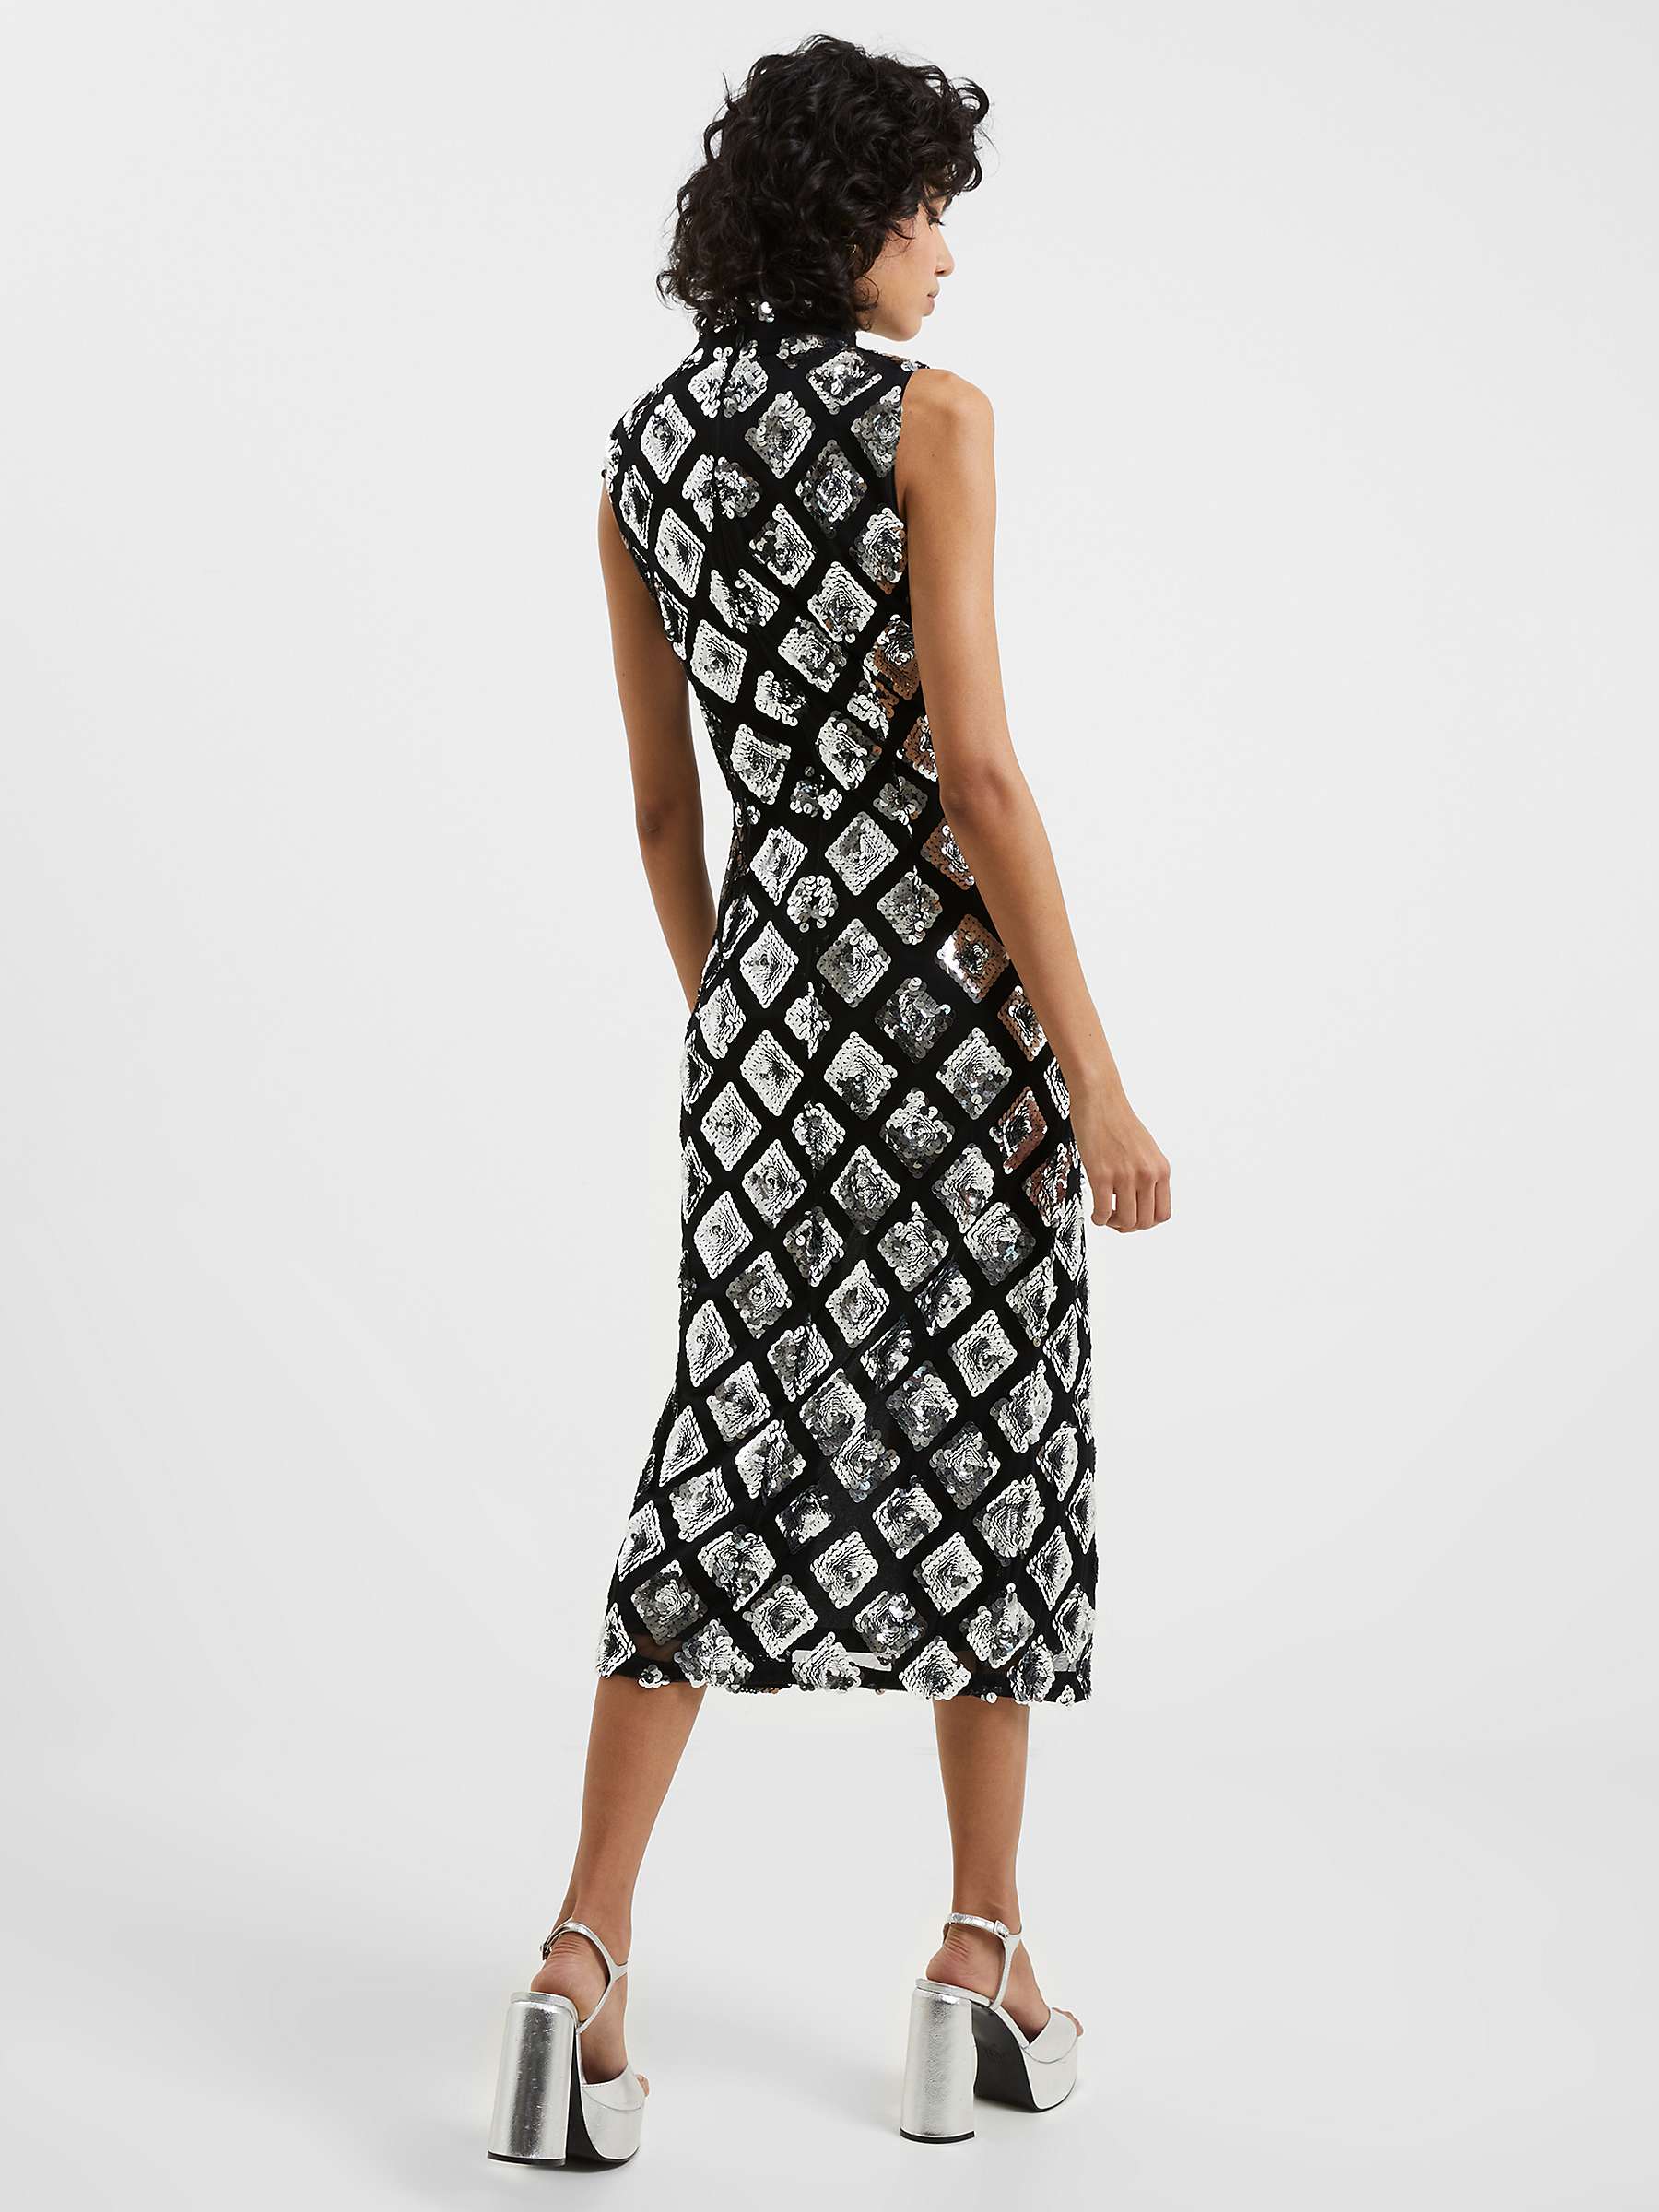 Buy French Connection Axel Embellished Dress, Black/Silver Online at johnlewis.com